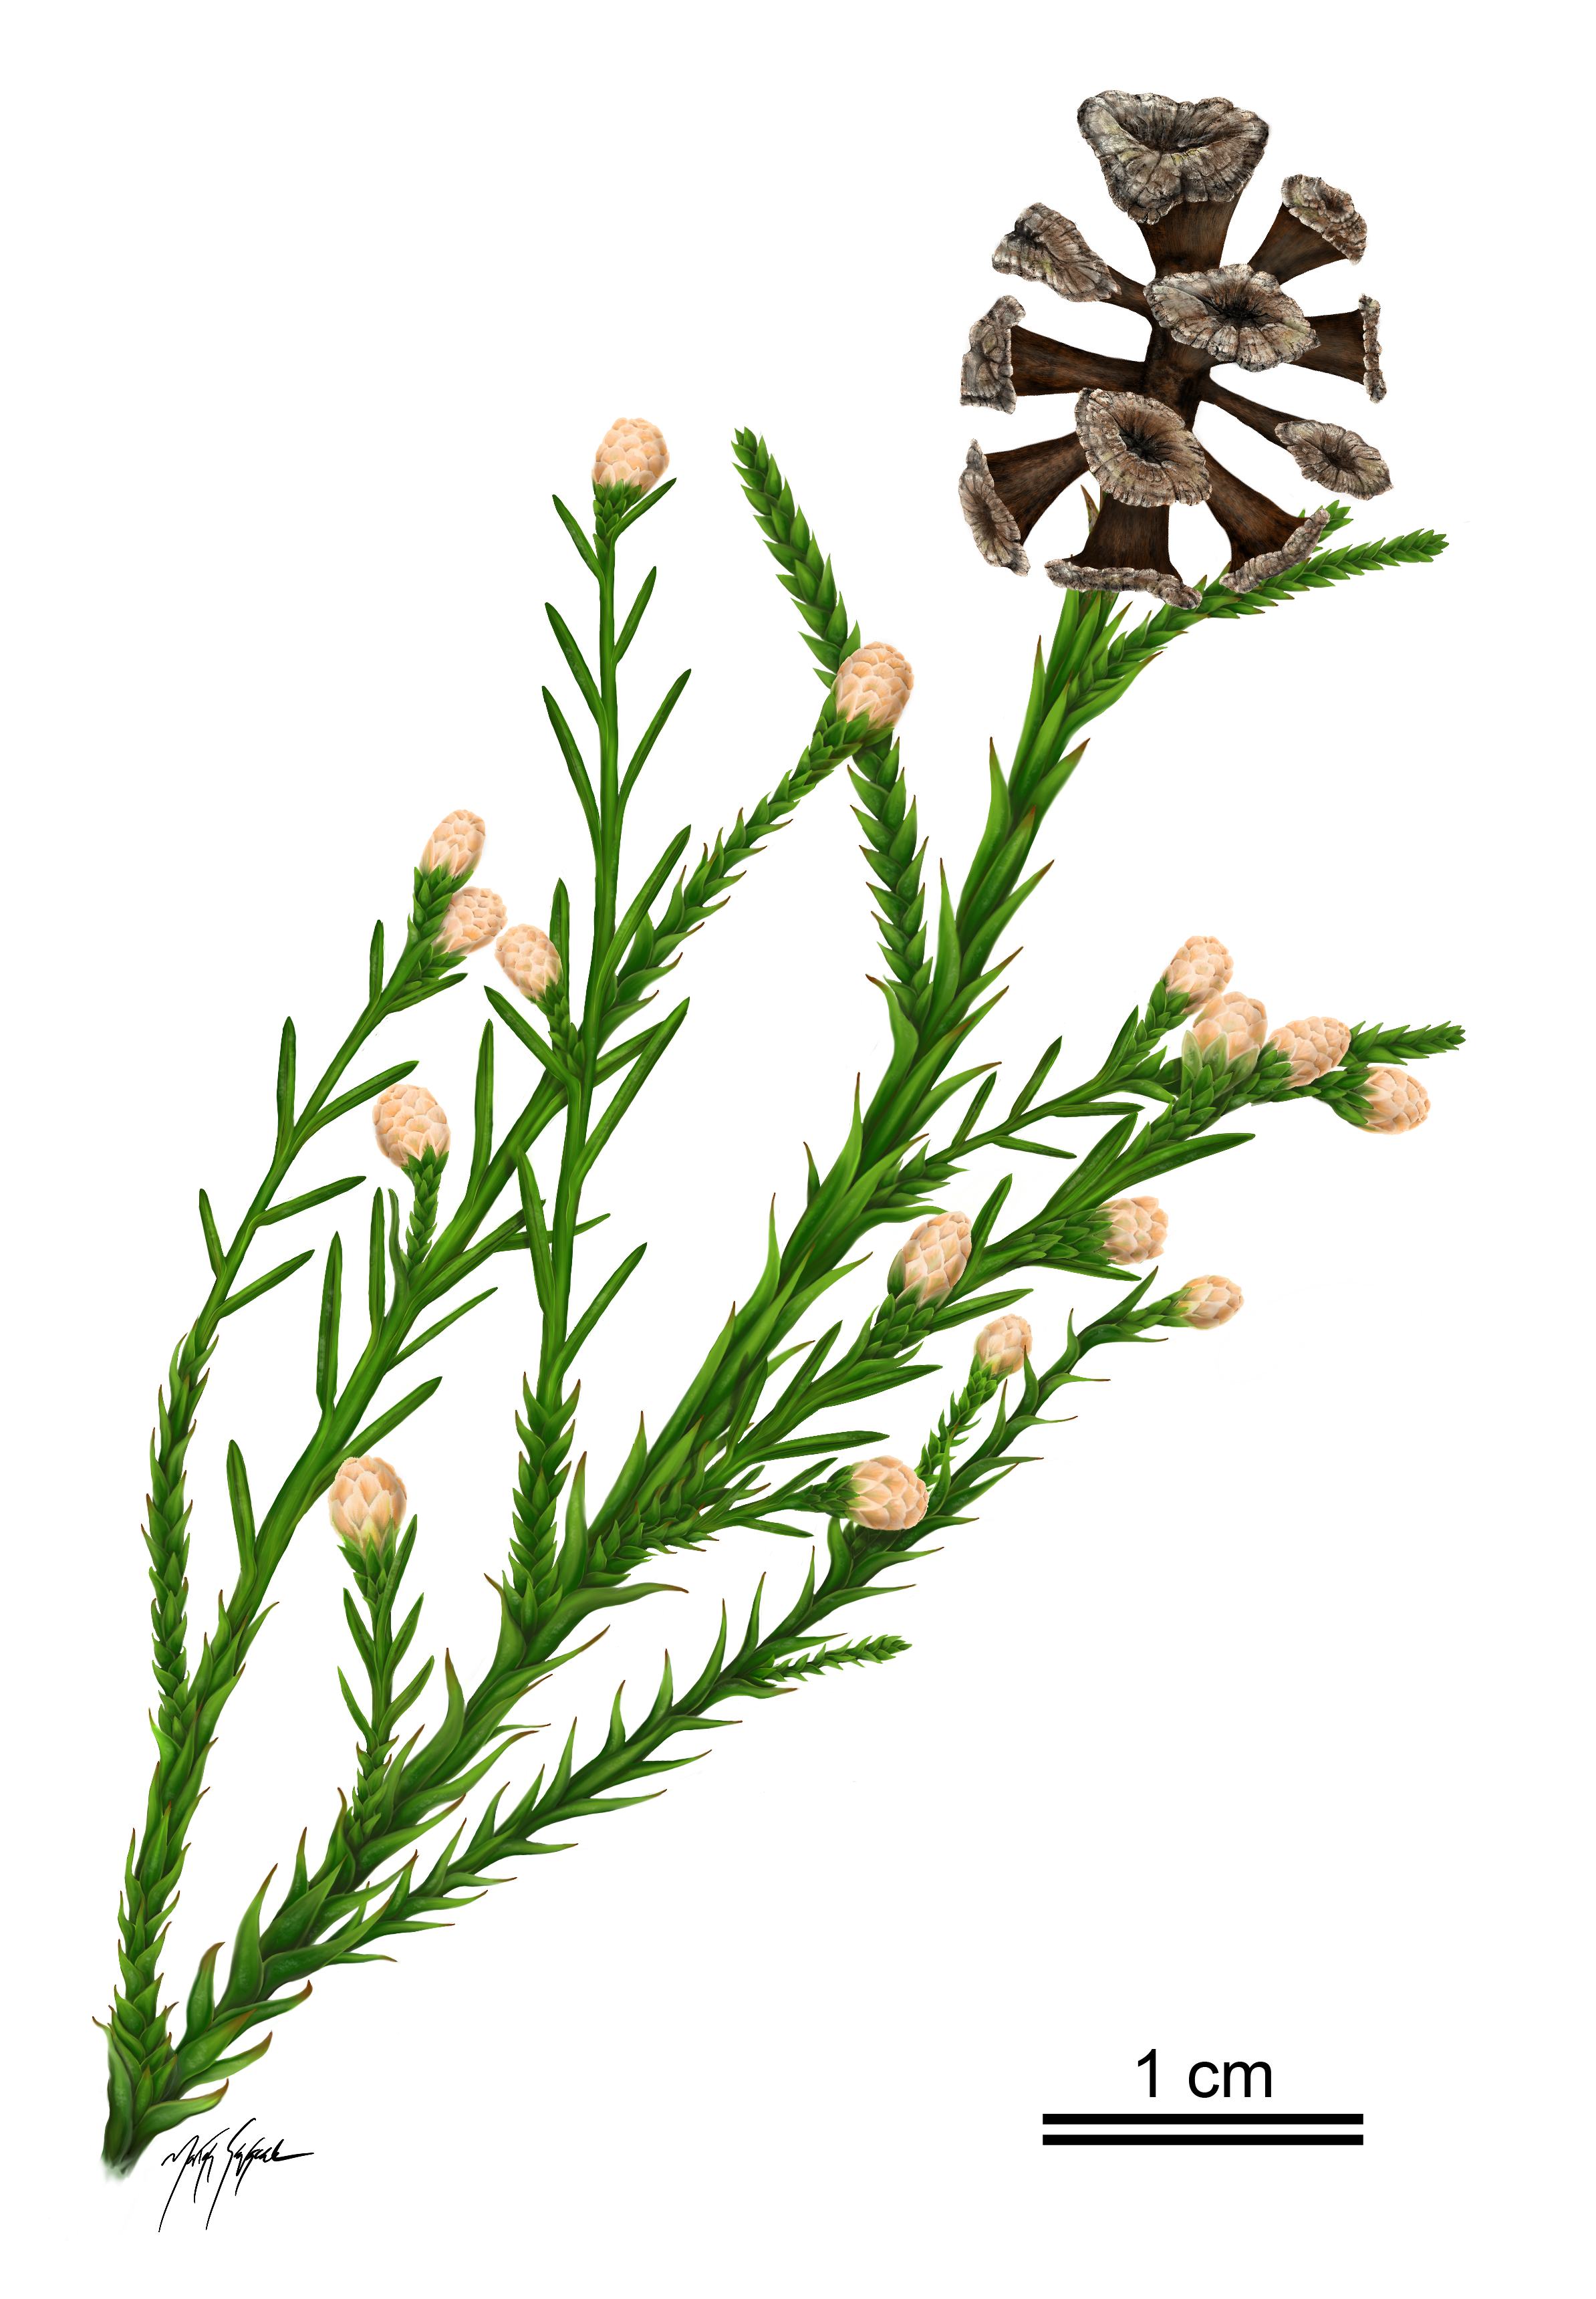 An artist reconstruction of a fossil redwood branch ending in a mature female cone accompanied by sixteen male pollen cones on numerous branchlets.